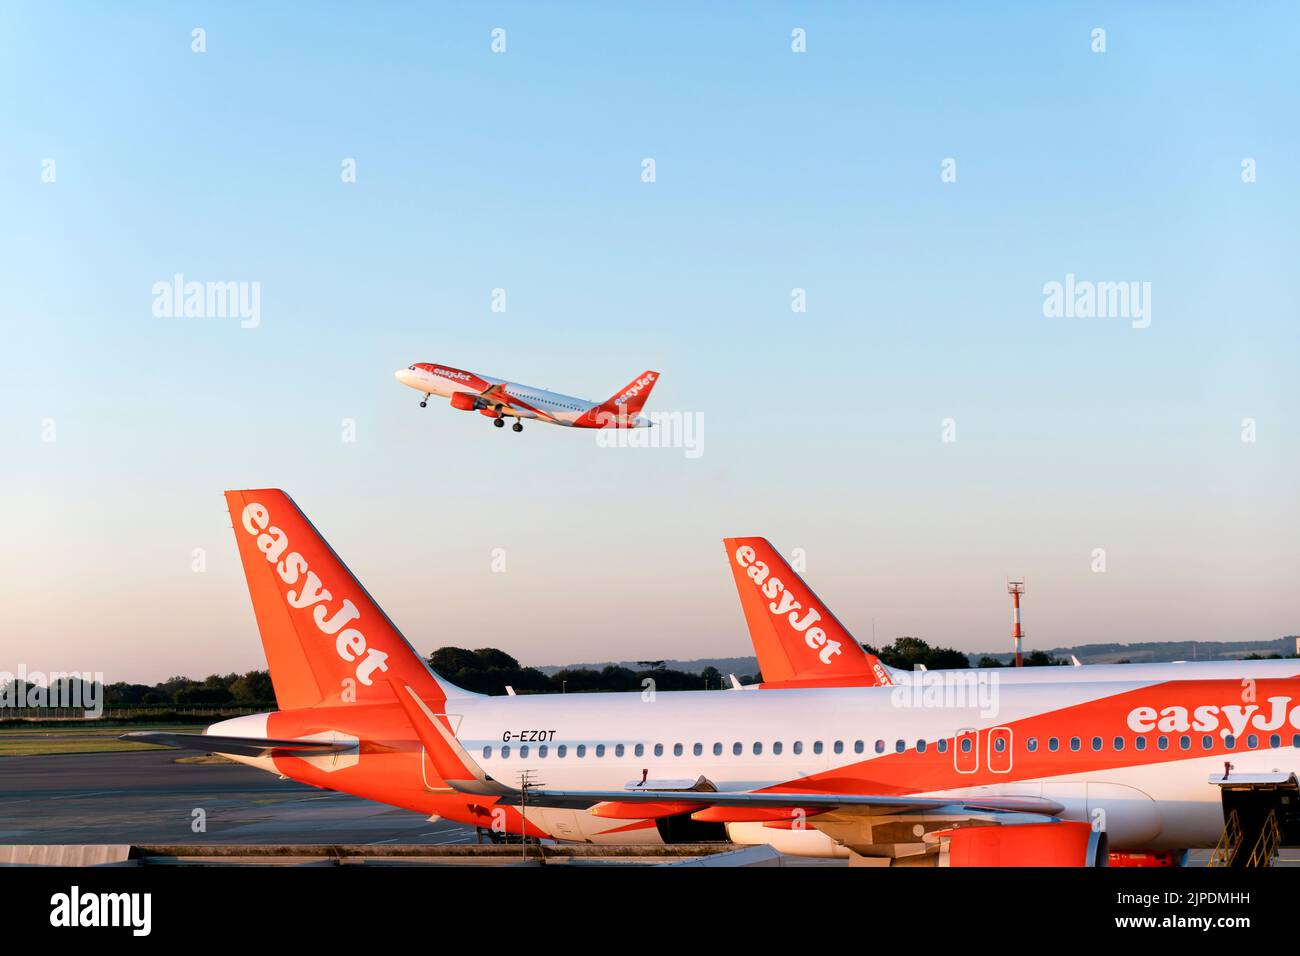 An EasyJet plane taking off from Bristol airport.  Another EasyJet plane is parked on the runway. The companies logo and branding are clearly shown. Stock Photo